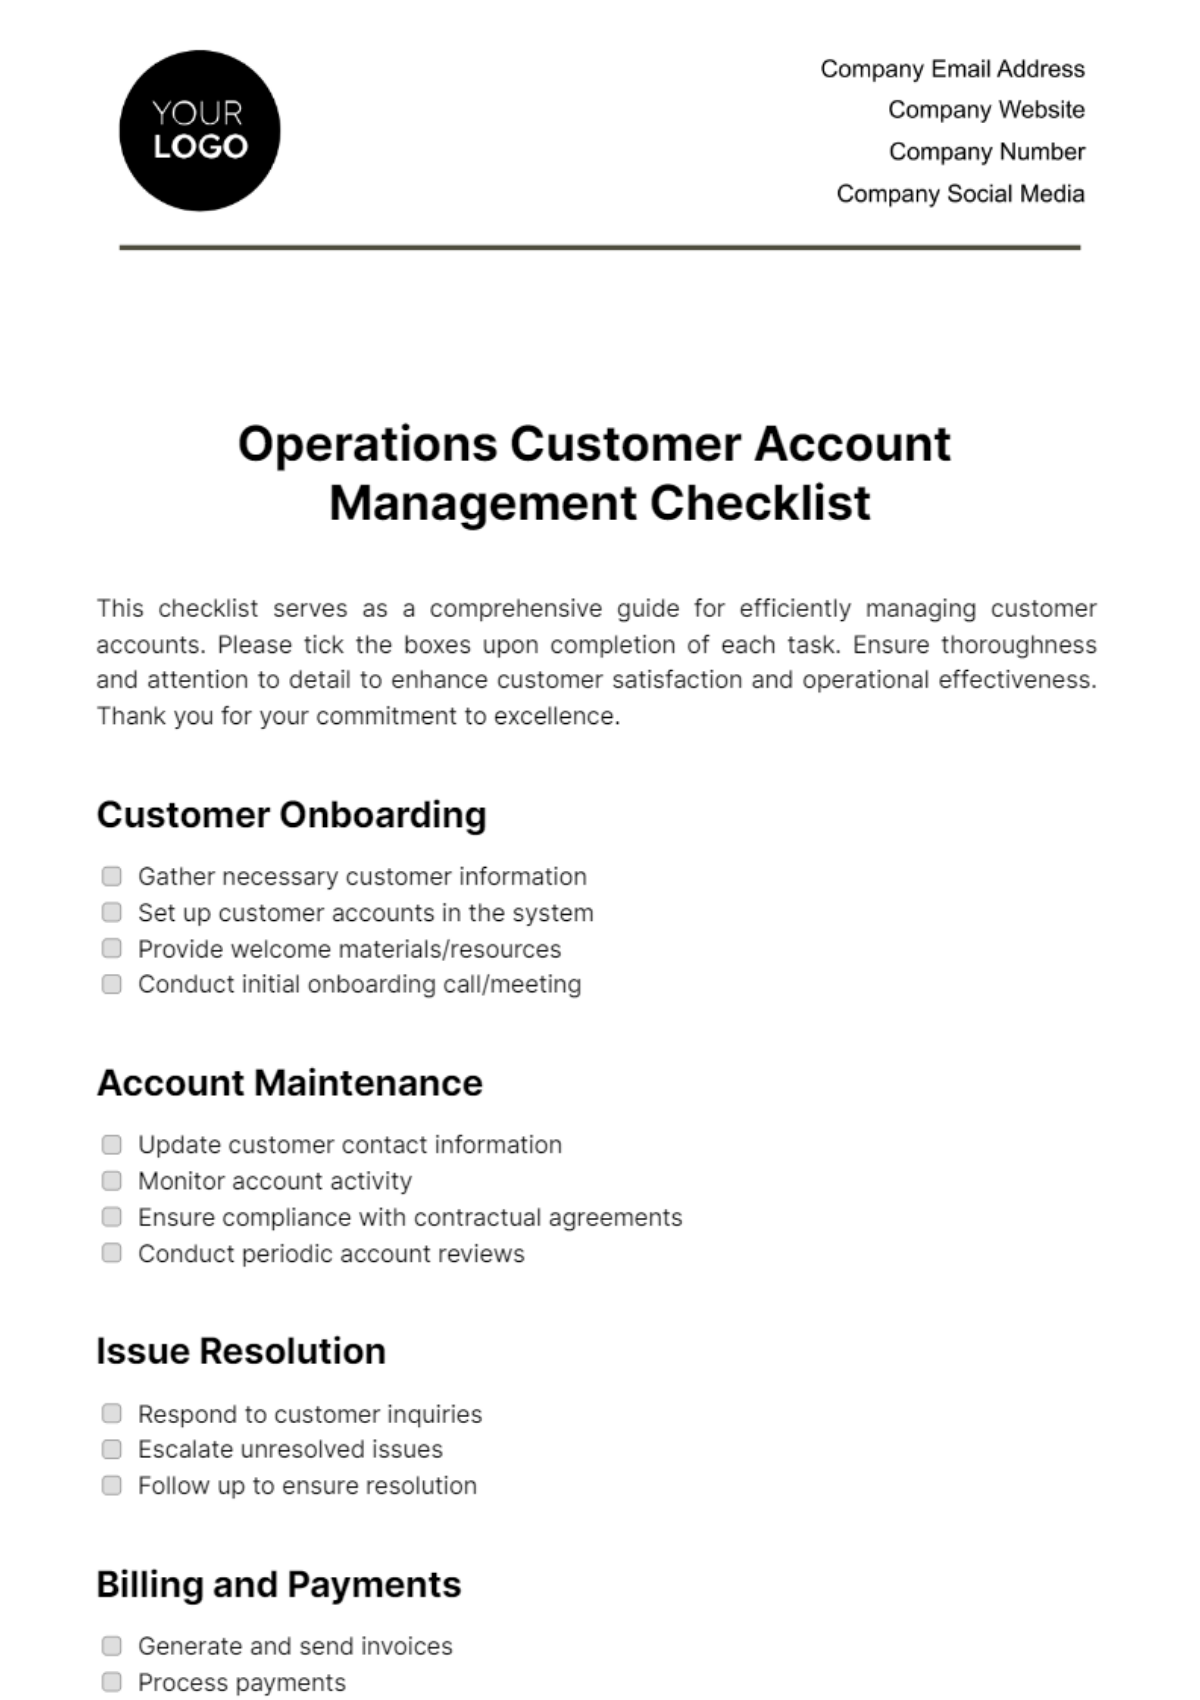 Free Operations Customer Account Management Checklist Template